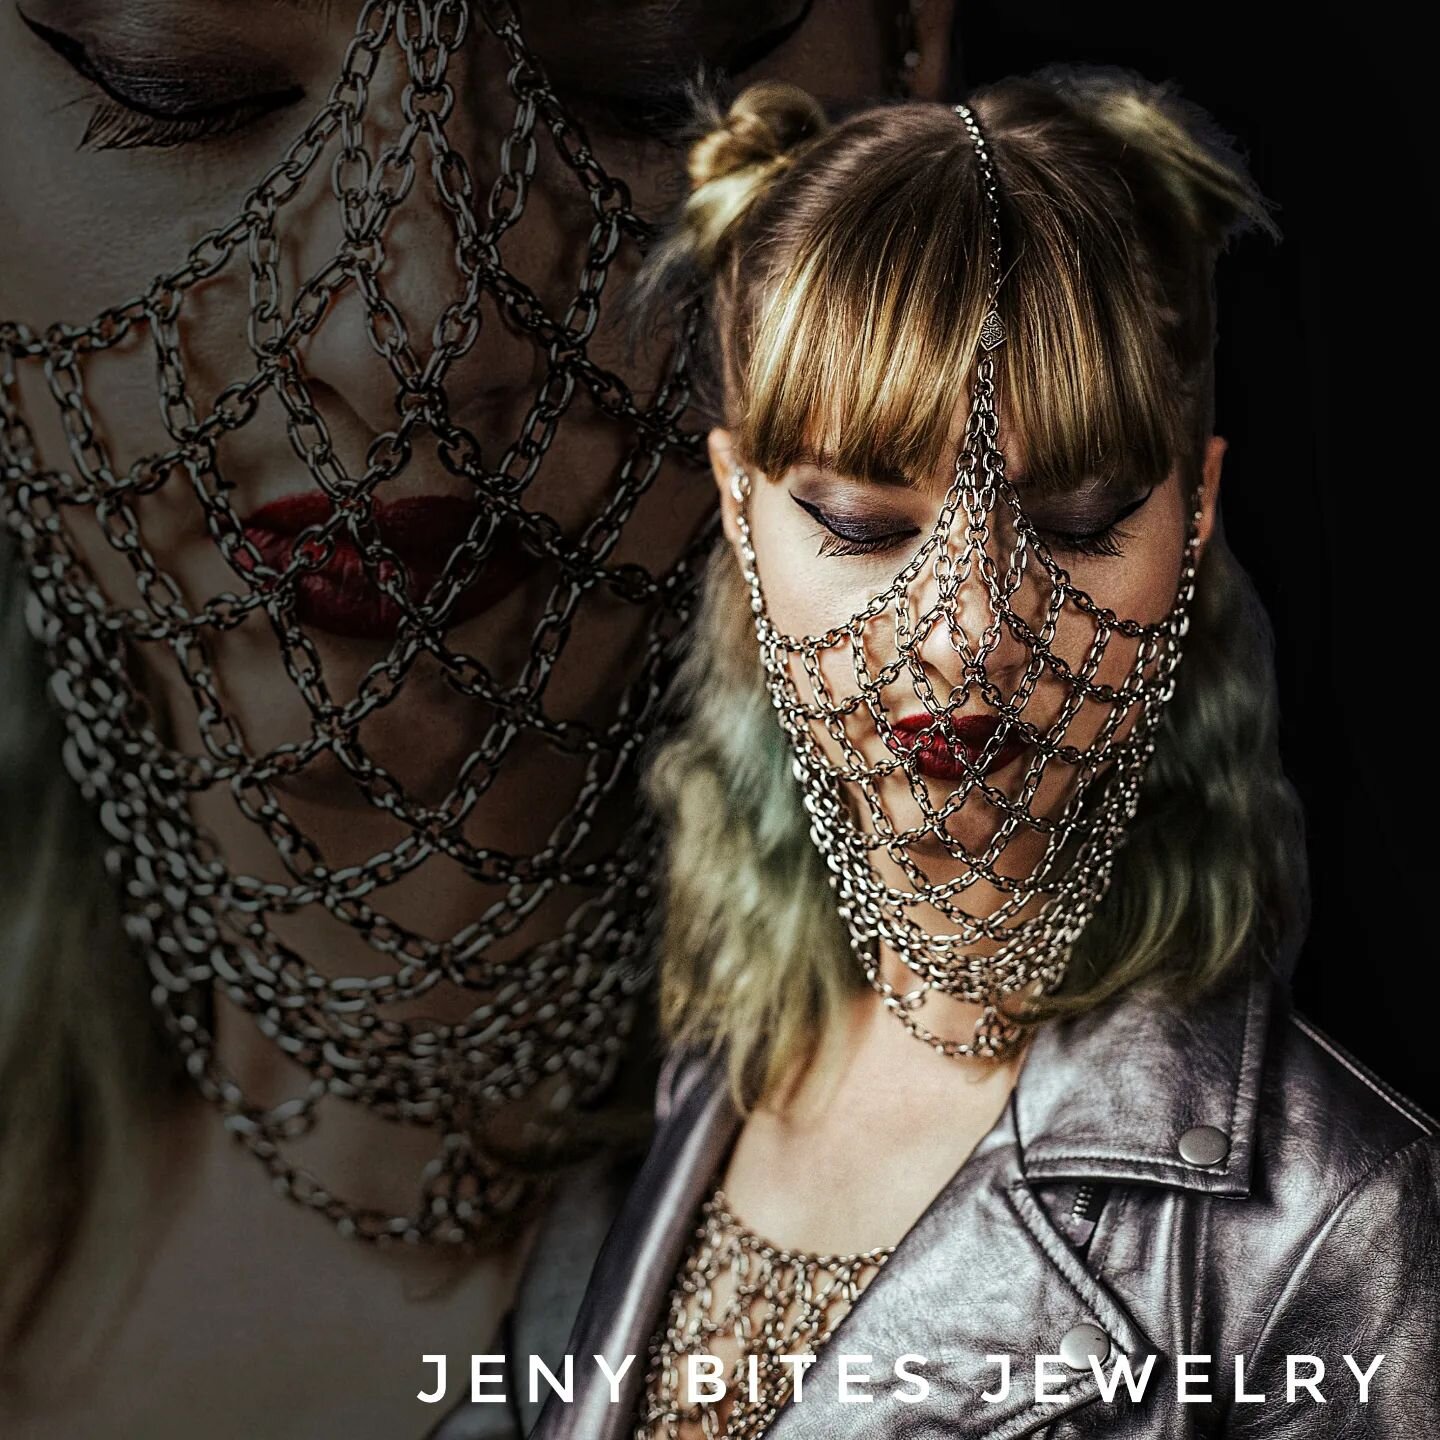 Face Chains ... cause they're sexy💋
-
#facejewels #facemask #jewelry #jewelryaccessories #jewelryaddict #jewelrylover #chains #beautiful #Sexy #festivaljewelry #burlesque #burningman #ravefashion #bodyjewelry #bodychains #different #bold #lifestyle 